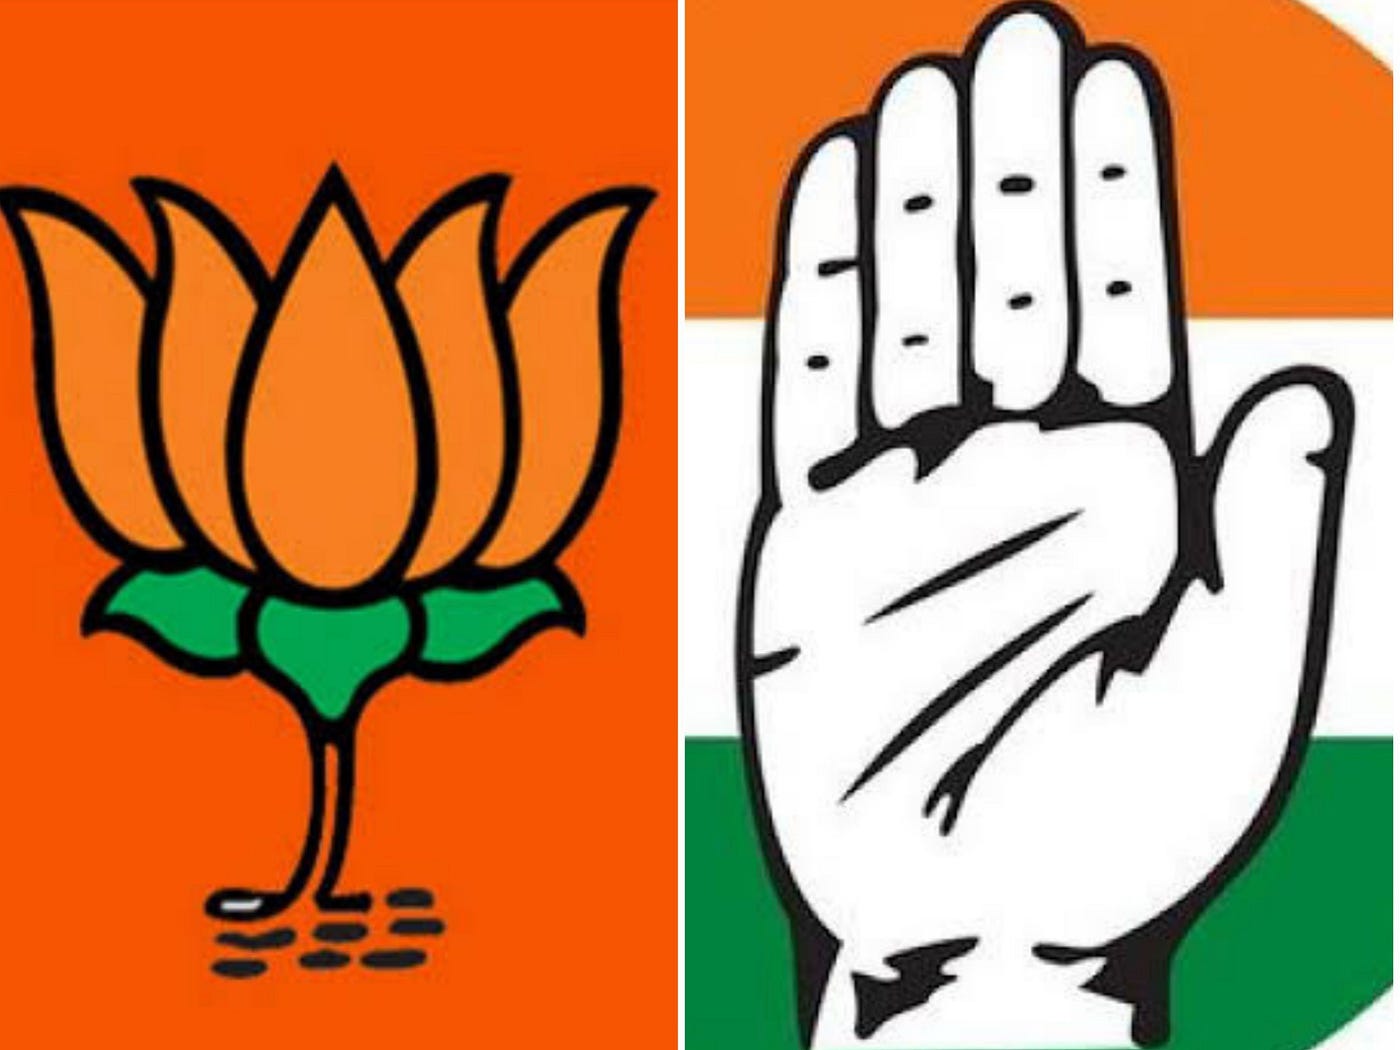 Congress Vs BJP. Two Sides of the Same Coin? | by Anand Abhishek | Medium